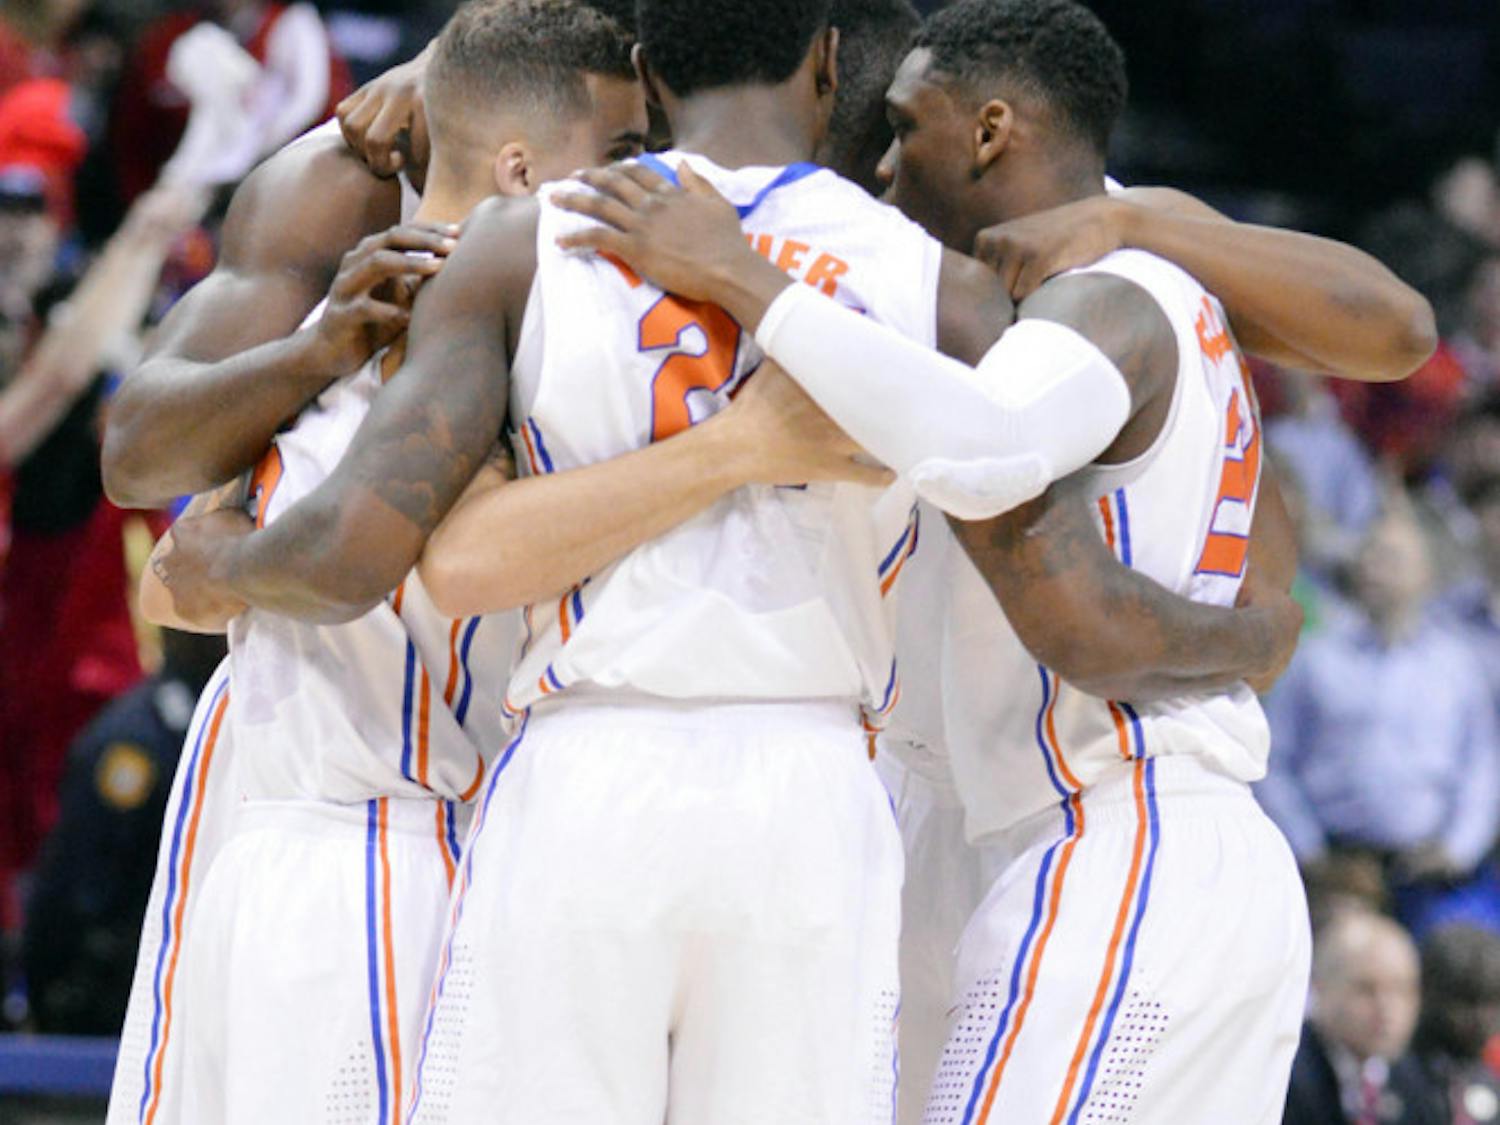 Florida’s starters huddle prior to the start of Florida’s win over Dayton on March 29 in FedExForum in Memphis, Tenn.